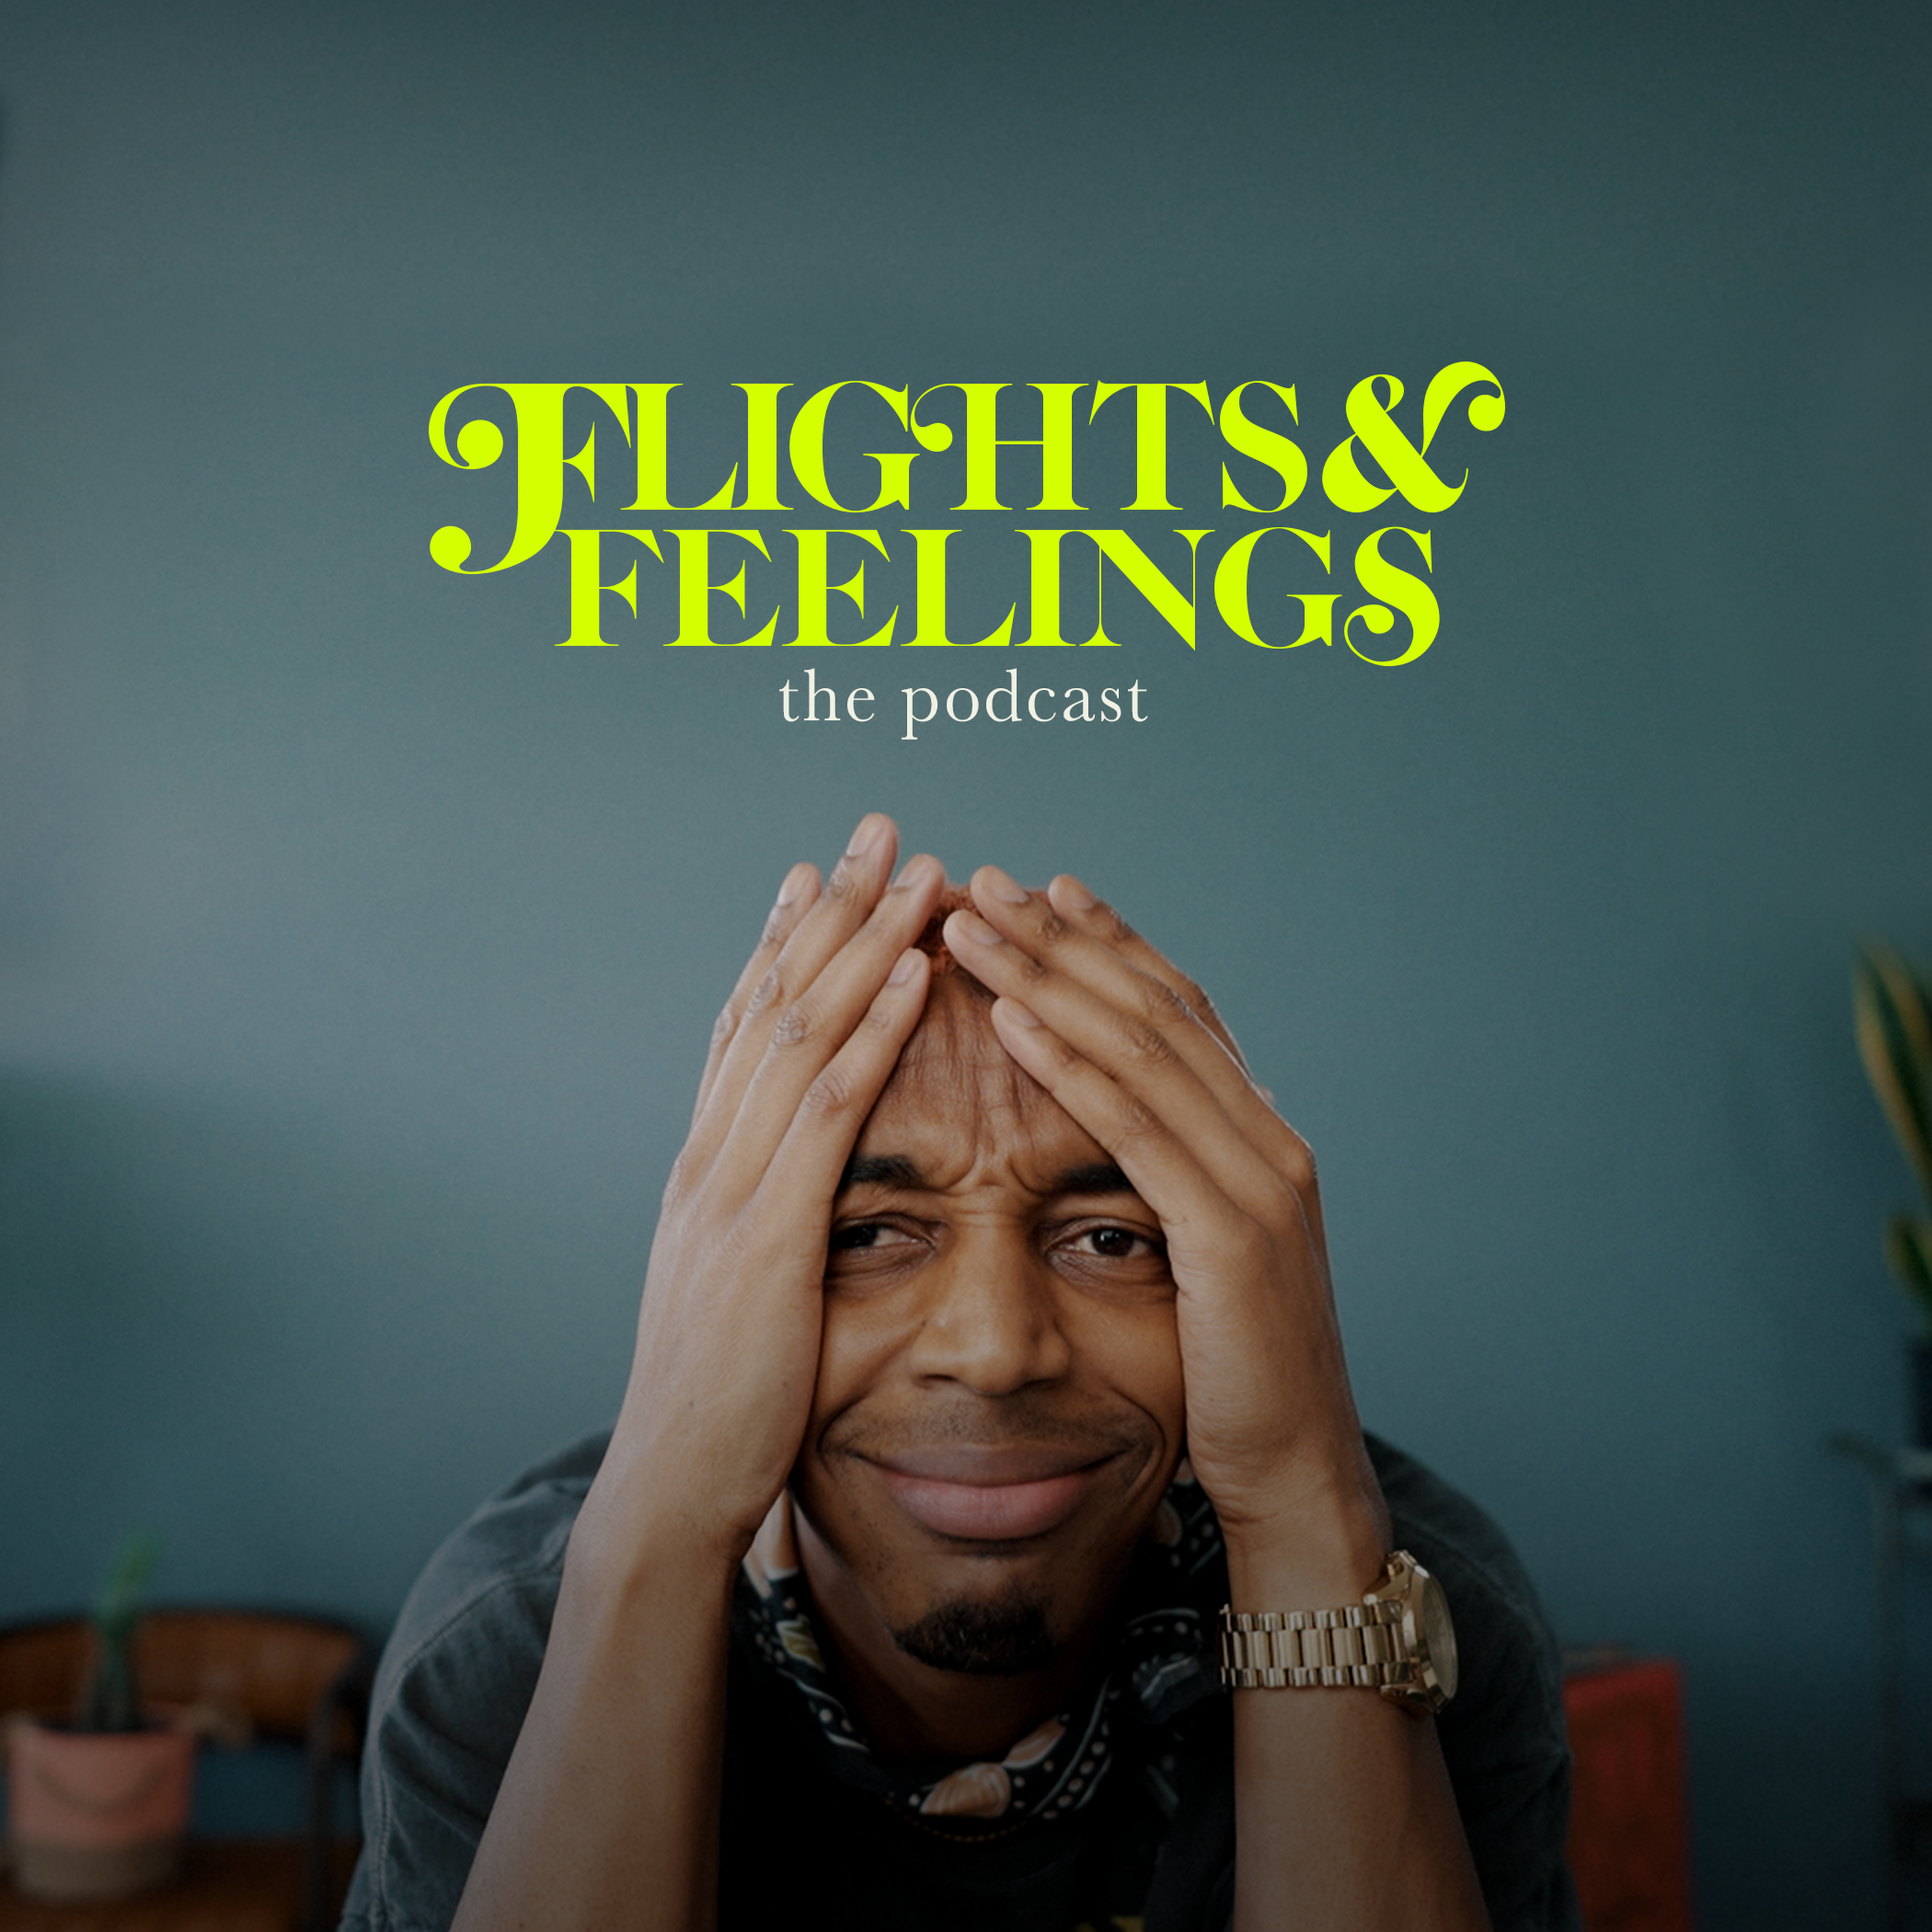 Flights & Feelings - the shores somewhere over here